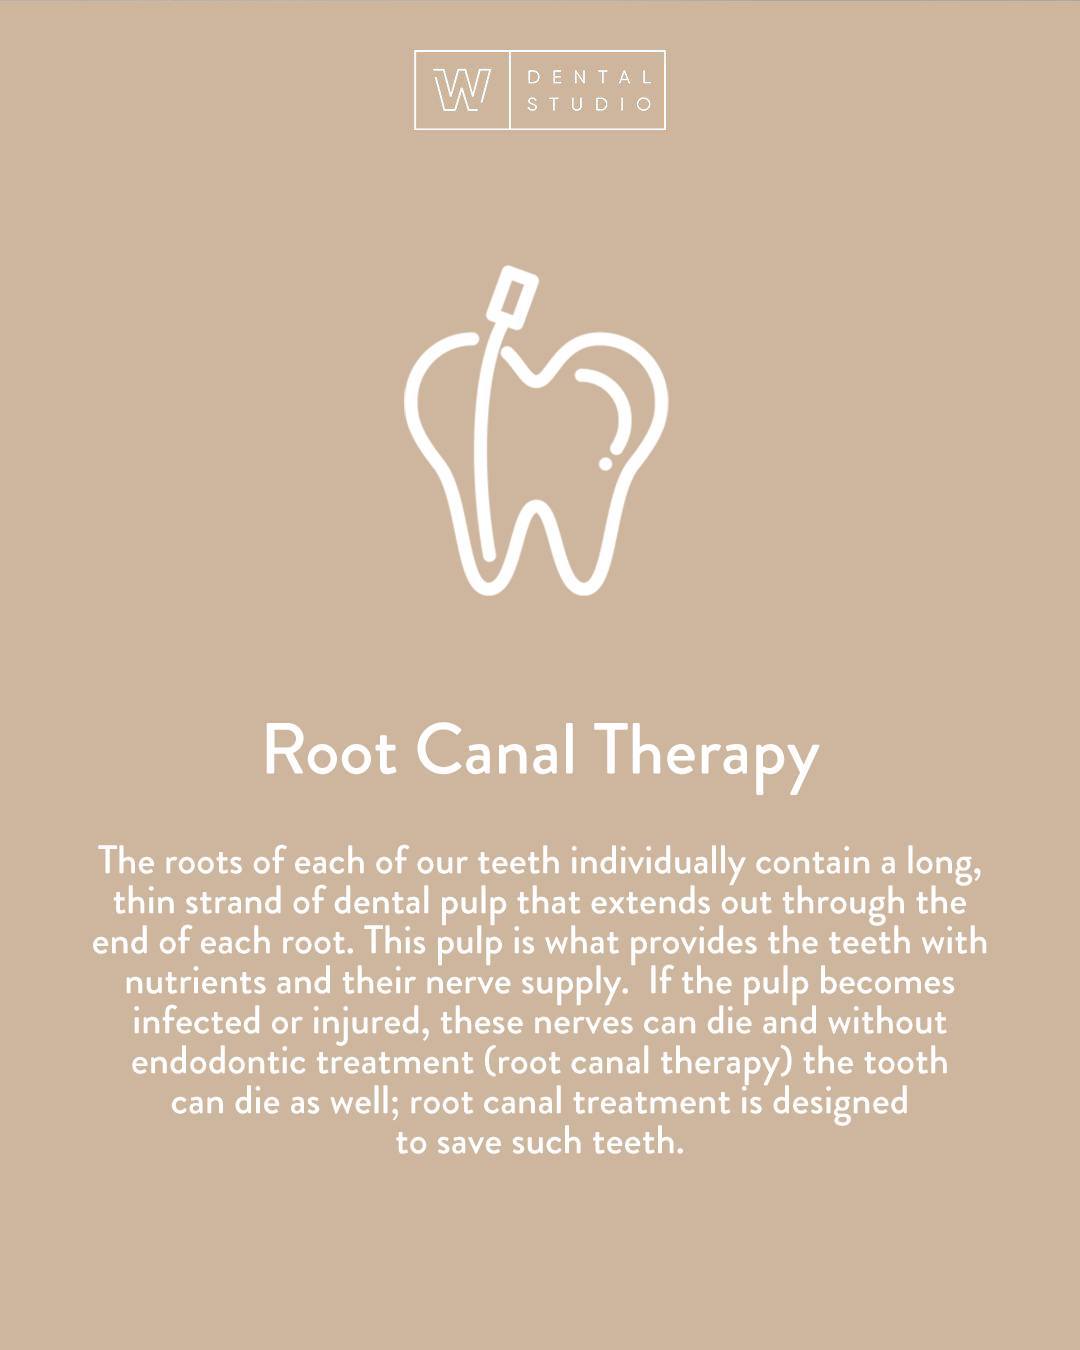 The roots of each of our teeth individually contain a long, thin strand of dental pulp that extends out through the end of each root.  This pulp is what provides the teeth with nutrients and their nerve supply.  If the pulp becomes infected or injured, these nerves can die and without endodontic treatment (root canal therapy) the tooth can die as well; root canal treatment is designed to save such teeth. 

Book an appointment: 

📞 613-564-3300
📍 270 Richmond Rd, Ottawa, ON
💻 https://www.wdentalstudio.com
📧 info@wdentalstudio.com